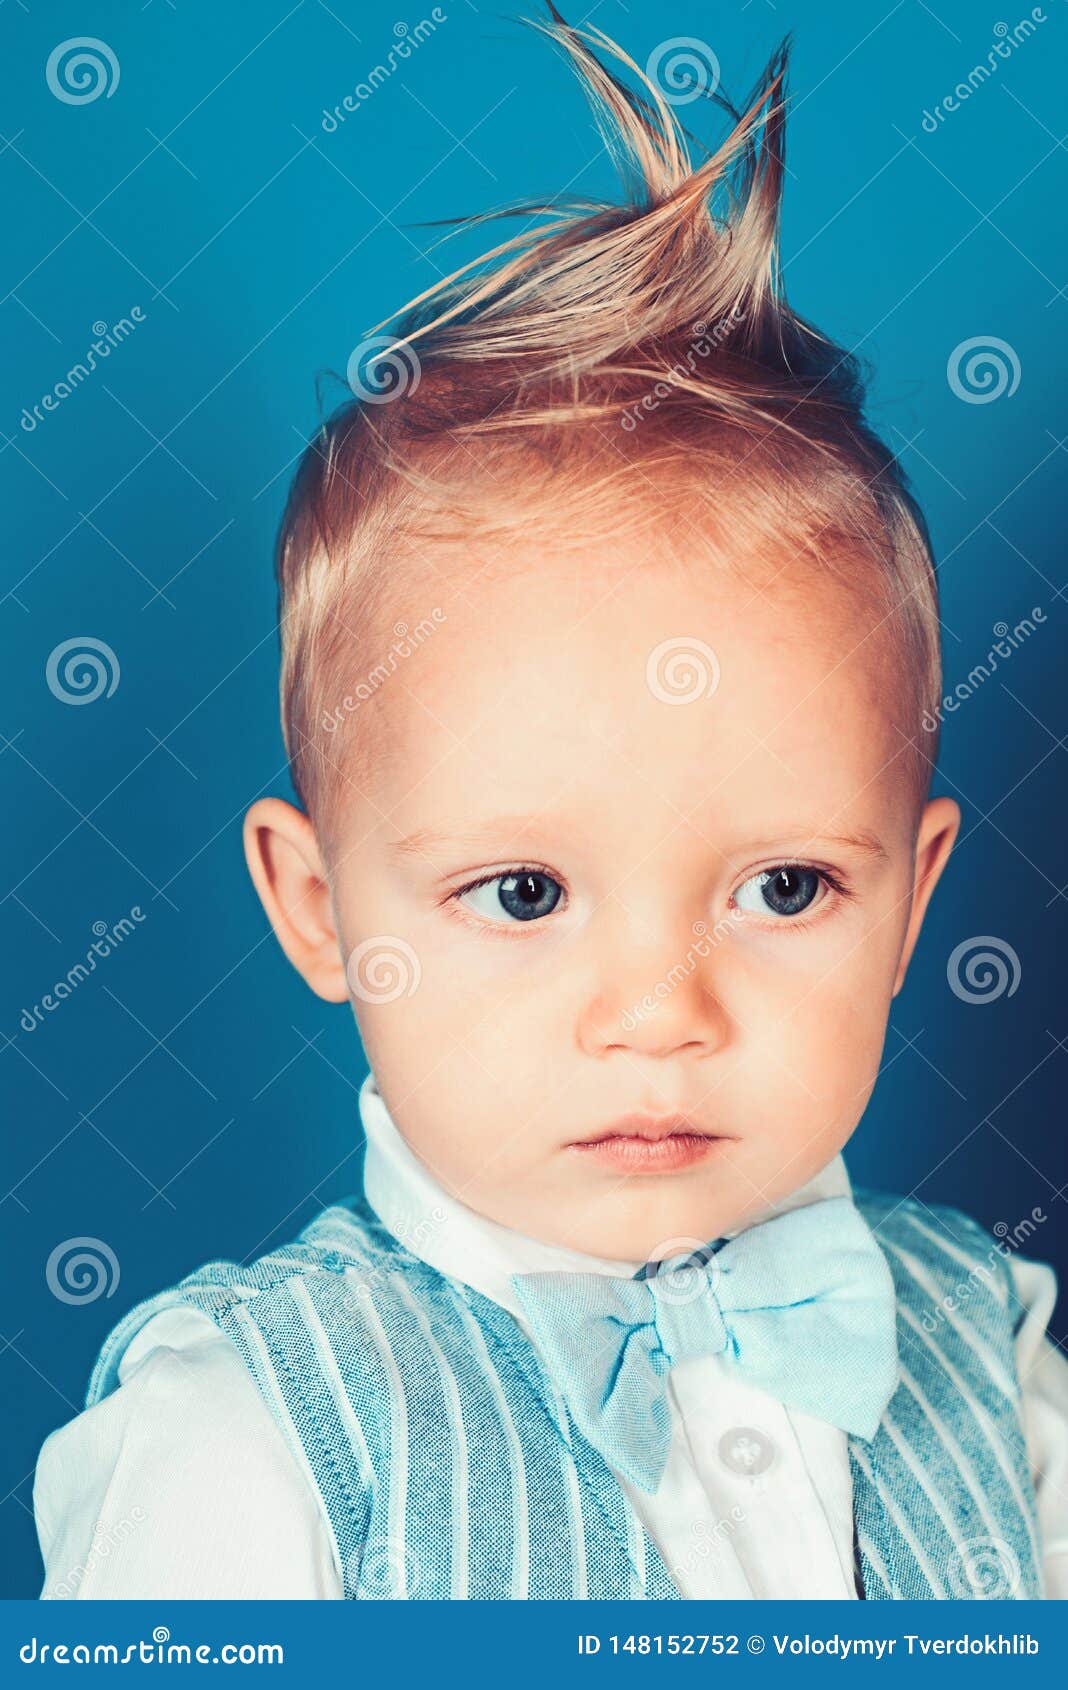 Healthy Hair Care Habits. Small Child with Messy Top Haircut. Small Boy  with Stylish Haircut Stock Photo - Image of toddler, youngster: 148152752